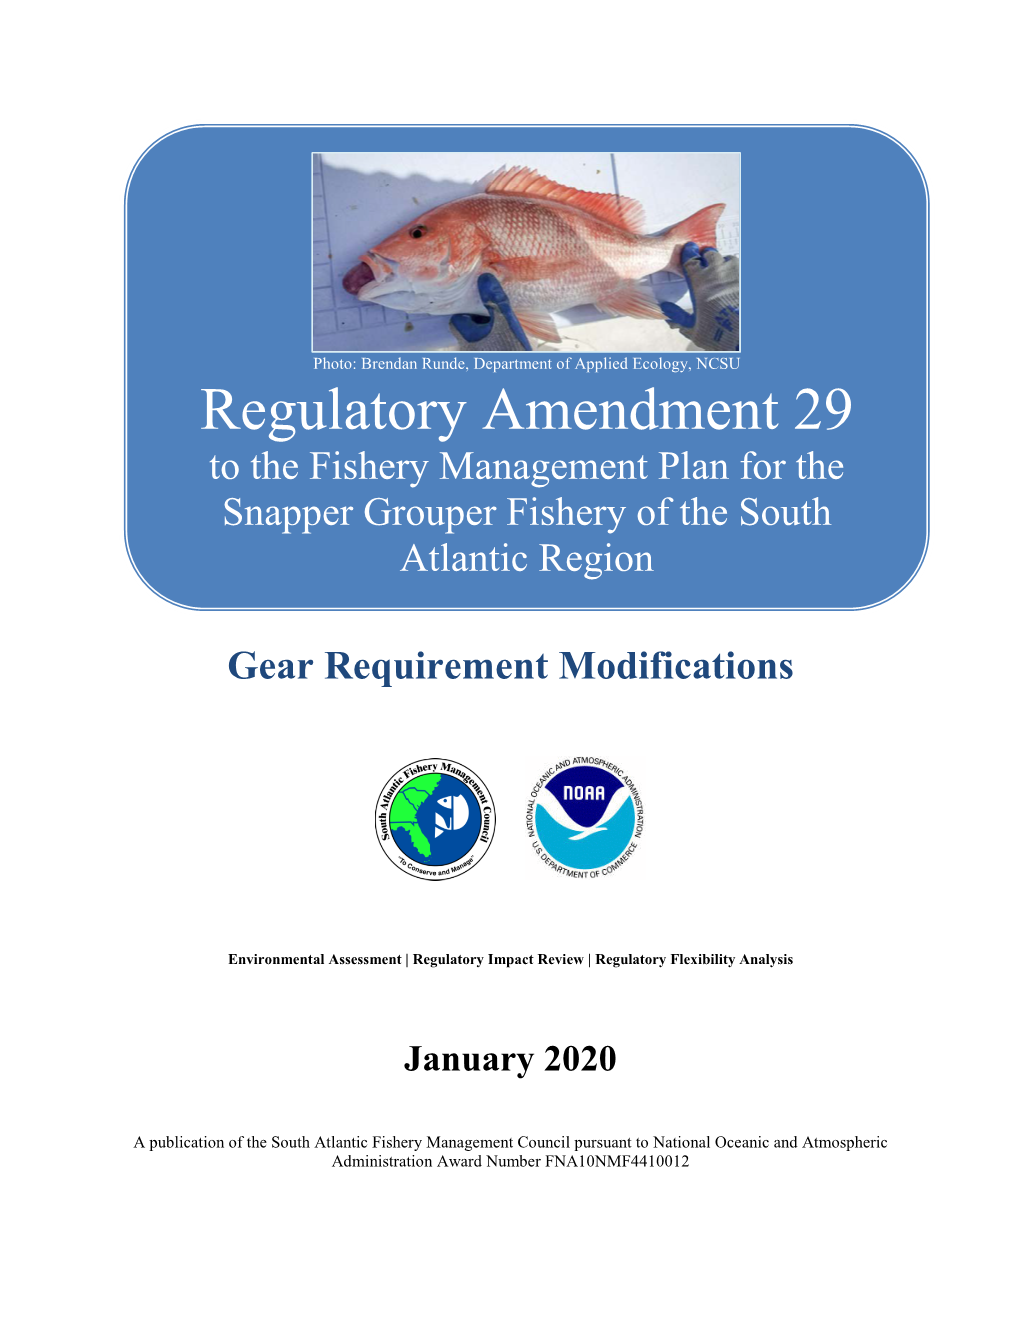 Snapper Grouper Regulatory Amendment 29 and These Data Provided the Basis for the Council’S Decisions